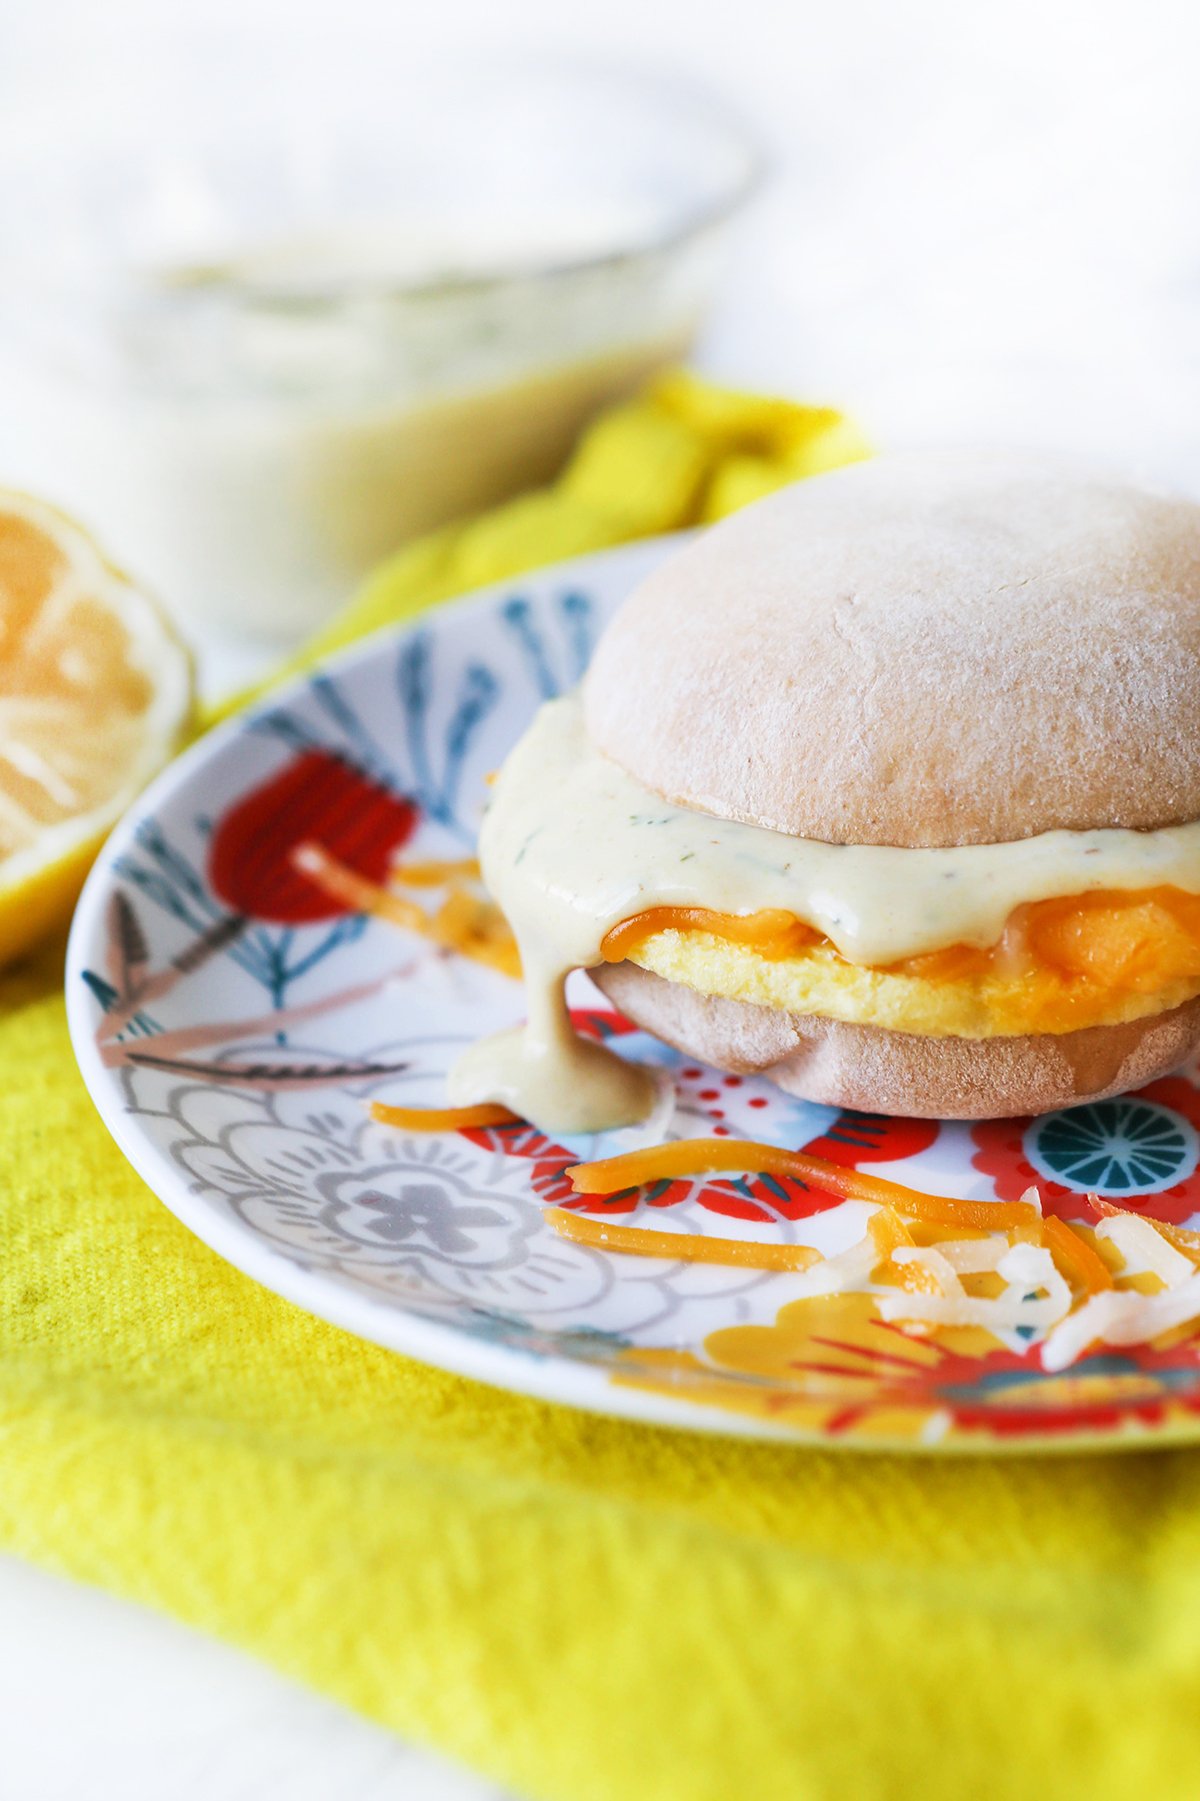 Breakfast sandwich on a plate with sauce dripping off over the side.